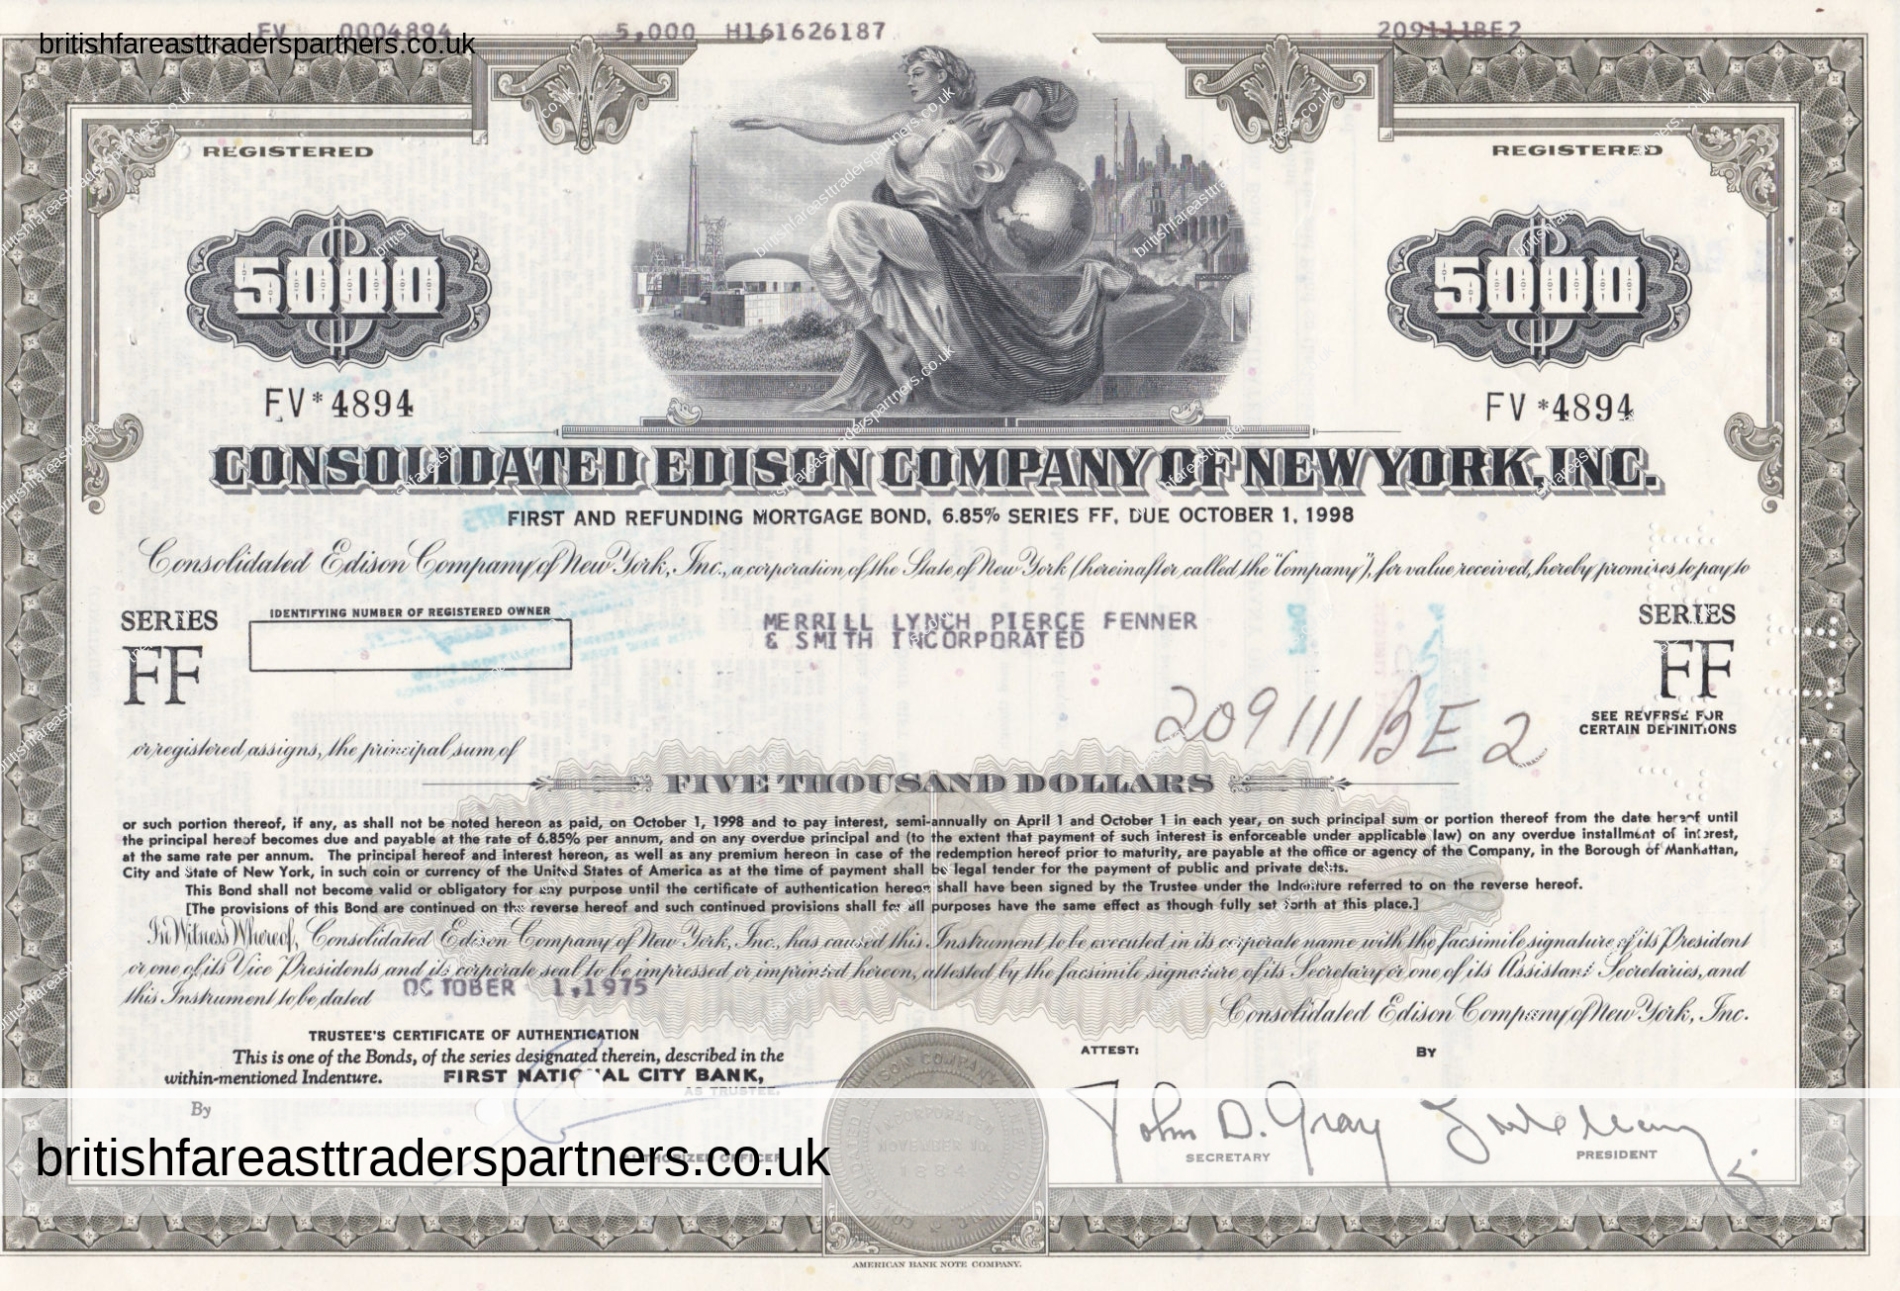 VINTAGE 1975 BOND CERTIFICATE “CONSOLIDATED EDISON COMPANY OF NEW YORK, INC.” COLLECTABLE DOCUMENTS | SHARES/ BONDS CERTIFICATES | COMPANIES | WORLD | SCRIPOPHILY | BUSINESS | INVESTMENTS